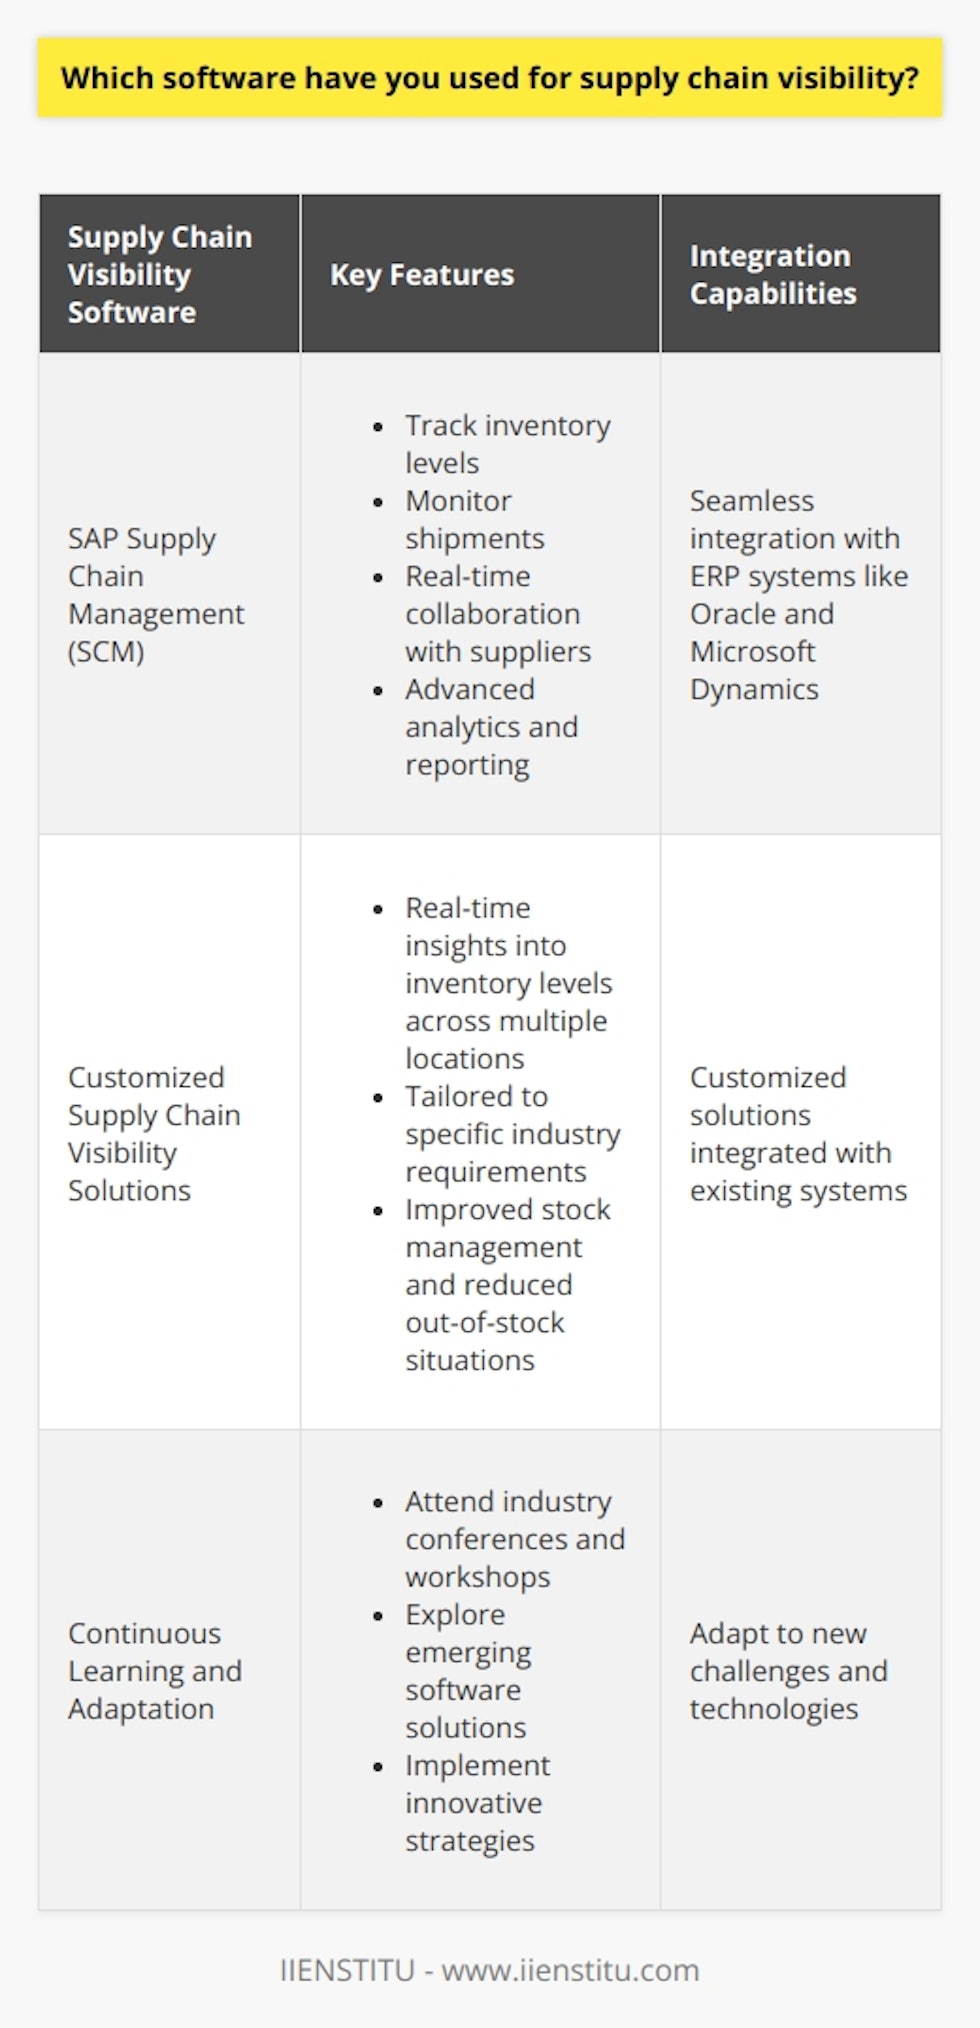 Throughout my career, I have utilized various software solutions to enhance supply chain visibility and optimize operations. One of the key tools I have extensively worked with is SAP Supply Chain Management (SCM). SAP Supply Chain Management (SCM) SAP SCM has been an integral part of my supply chain management toolkit. Its robust features and intuitive interface allowed me to efficiently track inventory levels, monitor shipments, and collaborate with suppliers in real-time. I found the advanced analytics and reporting capabilities particularly valuable in identifying bottlenecks and making data-driven decisions. Integration with ERP Systems I have also successfully integrated SAP SCM with other enterprise resource planning (ERP) systems, such as Oracle and Microsoft Dynamics. This seamless integration enabled end-to-end visibility across the entire supply chain, from procurement to delivery. By bridging the gap between different systems, I could streamline processes and improve overall efficiency. Customized Supply Chain Visibility Solutions In addition to SAP SCM, I have worked with customized supply chain visibility solutions tailored to specific industry requirements. For example, when I was involved in a project for a global retail company, we implemented a bespoke software platform that provided real-time insights into inventory levels across multiple warehouses and retail outlets. This customized solution significantly improved stock management and reduced out-of-stock situations. Continuous Learning and Adaptation I am a firm believer in continuous learning and staying updated with the latest supply chain visibility technologies. I regularly attend industry conferences and workshops to explore emerging software solutions and best practices. This proactive approach has allowed me to adapt quickly to new challenges and implement innovative strategies to enhance supply chain performance.